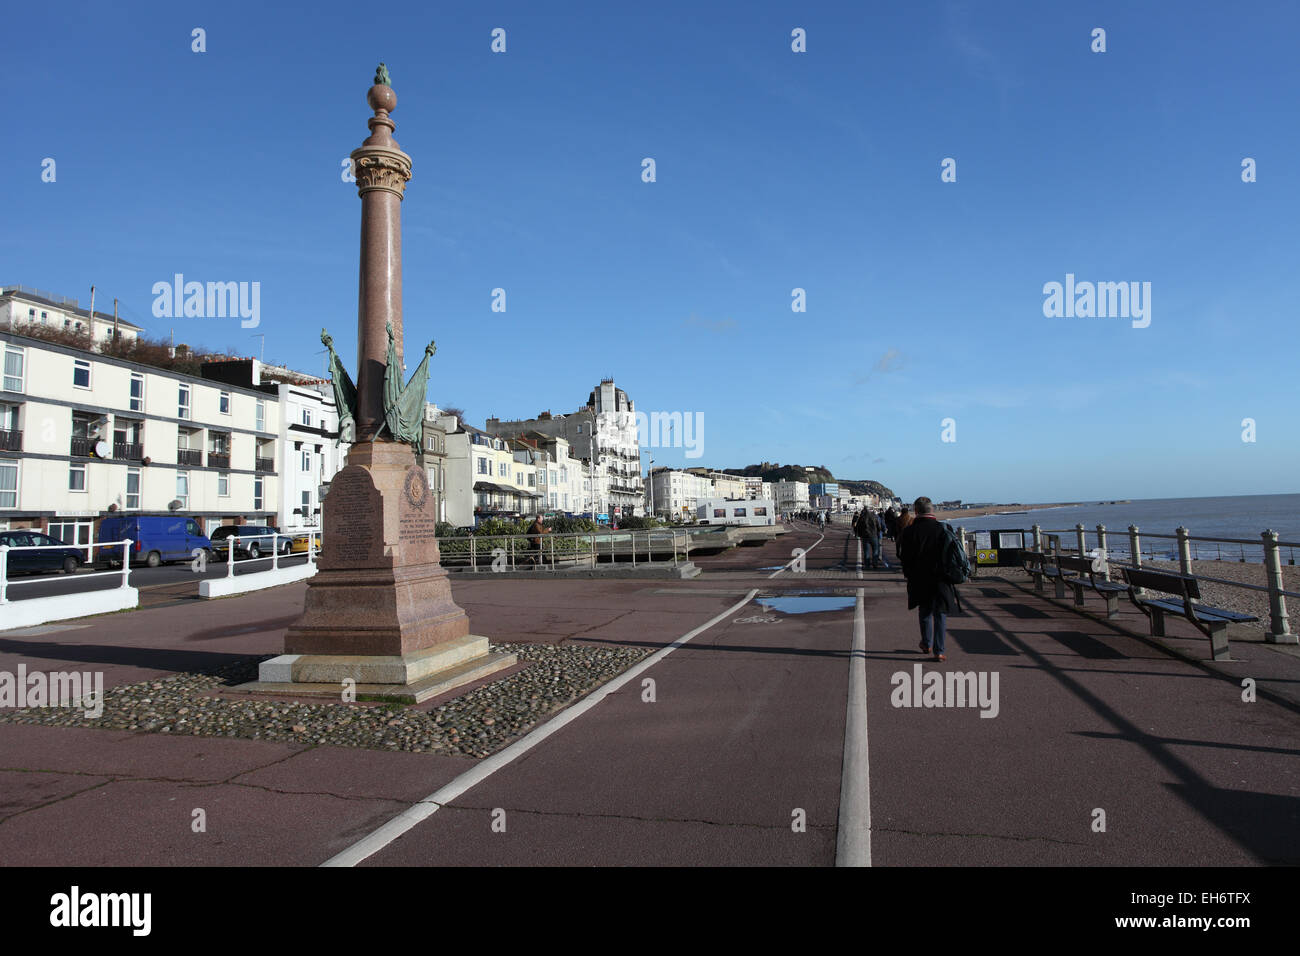 Hastings seafront promenade with the listed Boer War (1899-1902) memorial, East Sussex Stock Photo